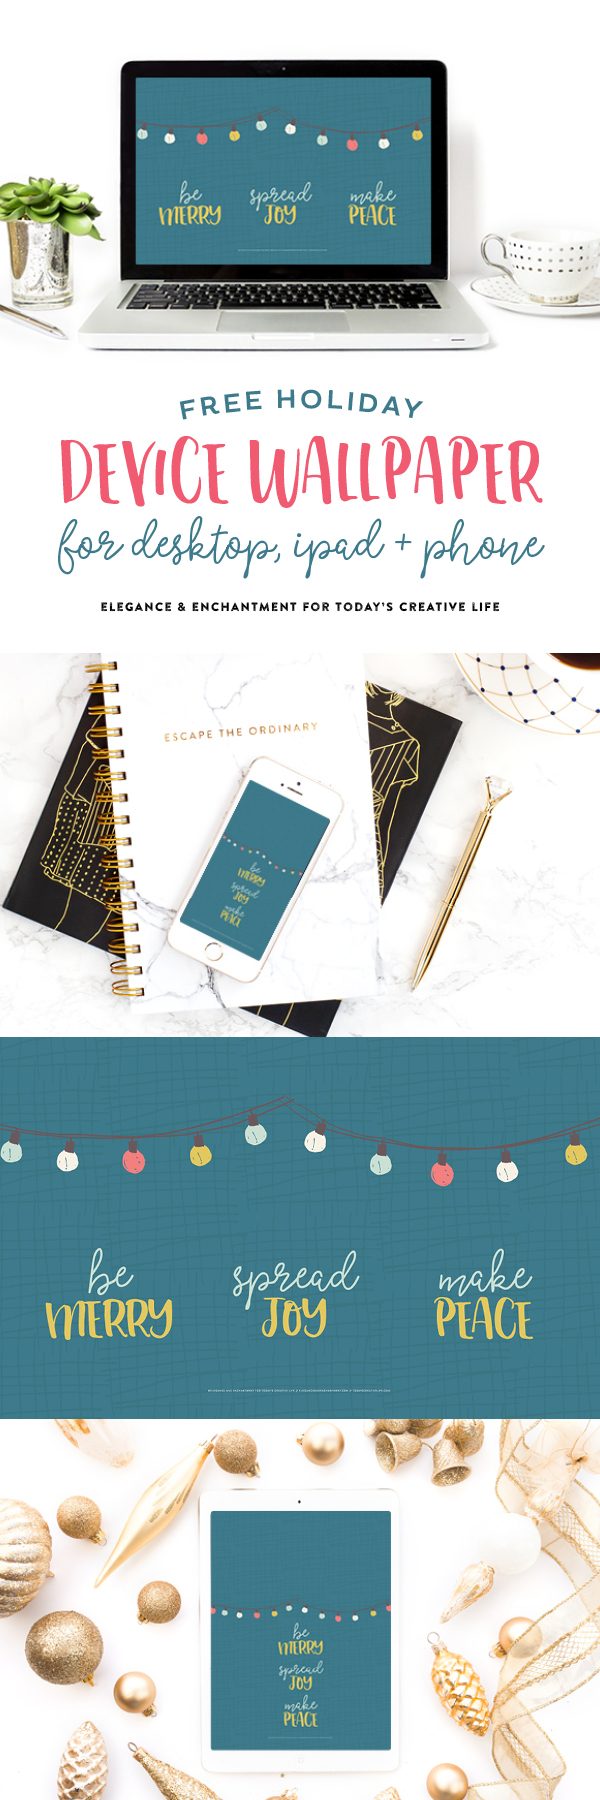 Organized for the Year 12 month Calendar Bundle from Elegance and Enchantment | Free download wallpapers on TodaysCreativeLife.com